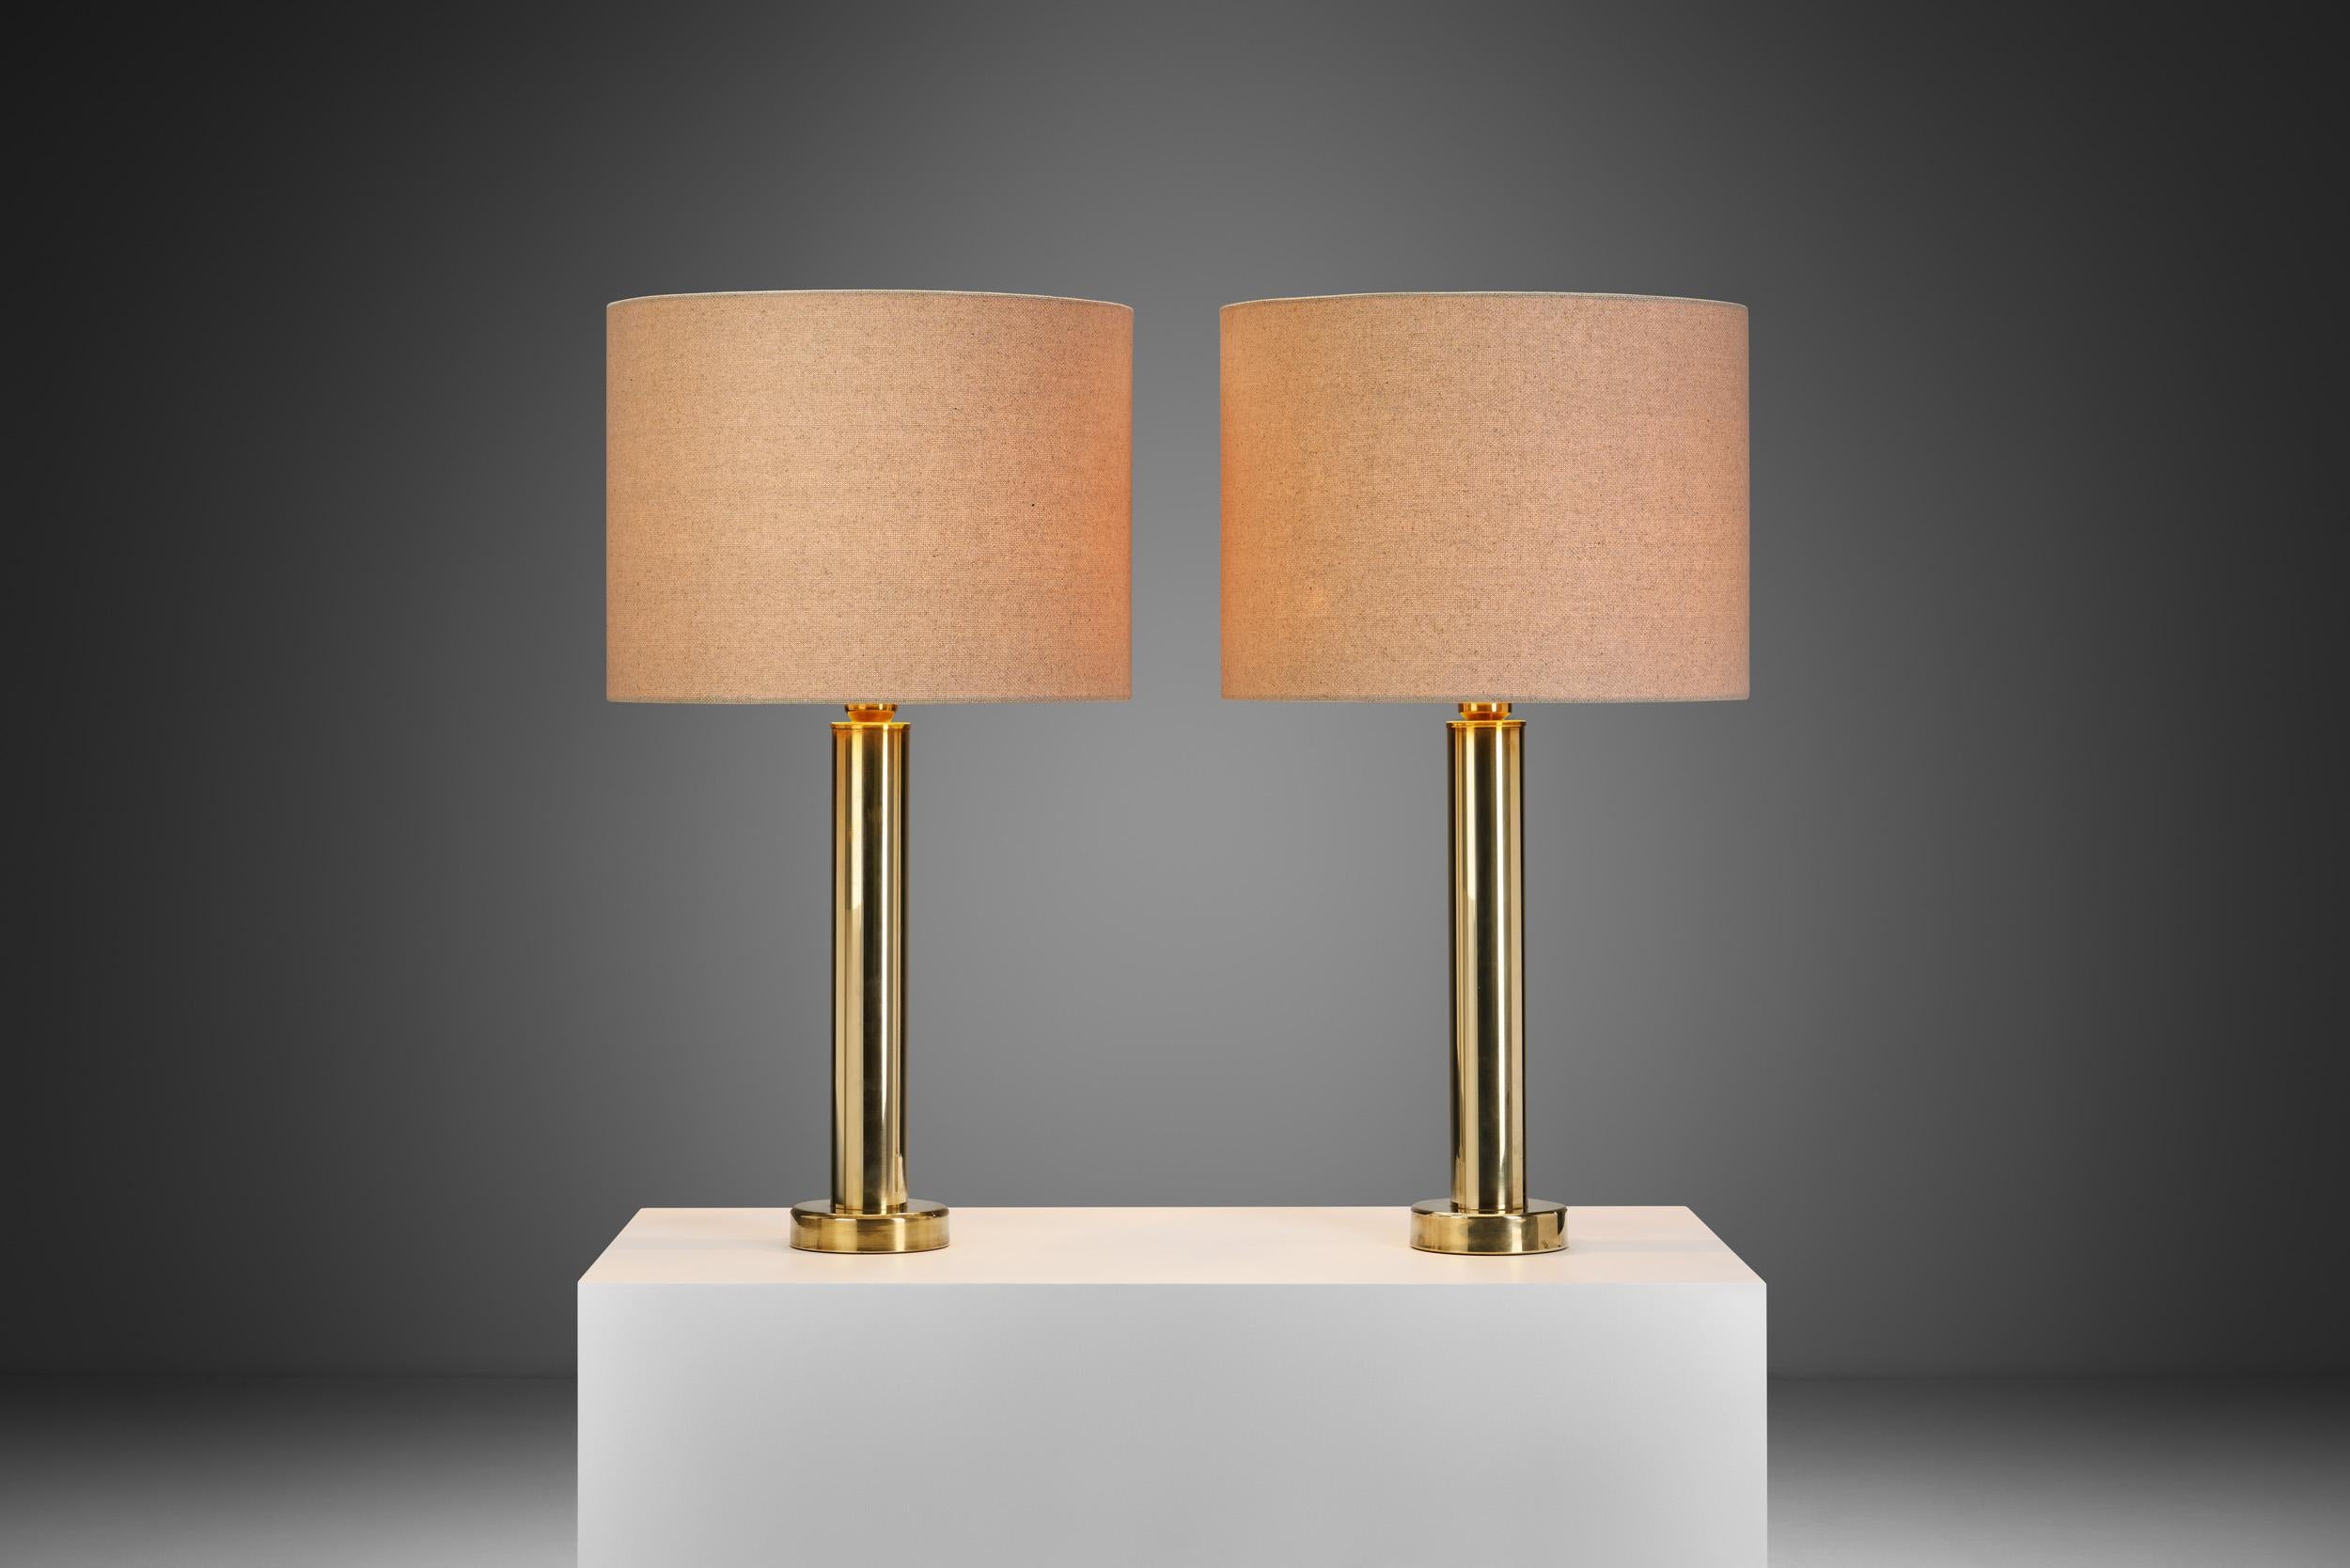 Large Swedish Modern Brass Table Lamps by Kosta Elarmatur, Sweden ca 1960s For Sale 1